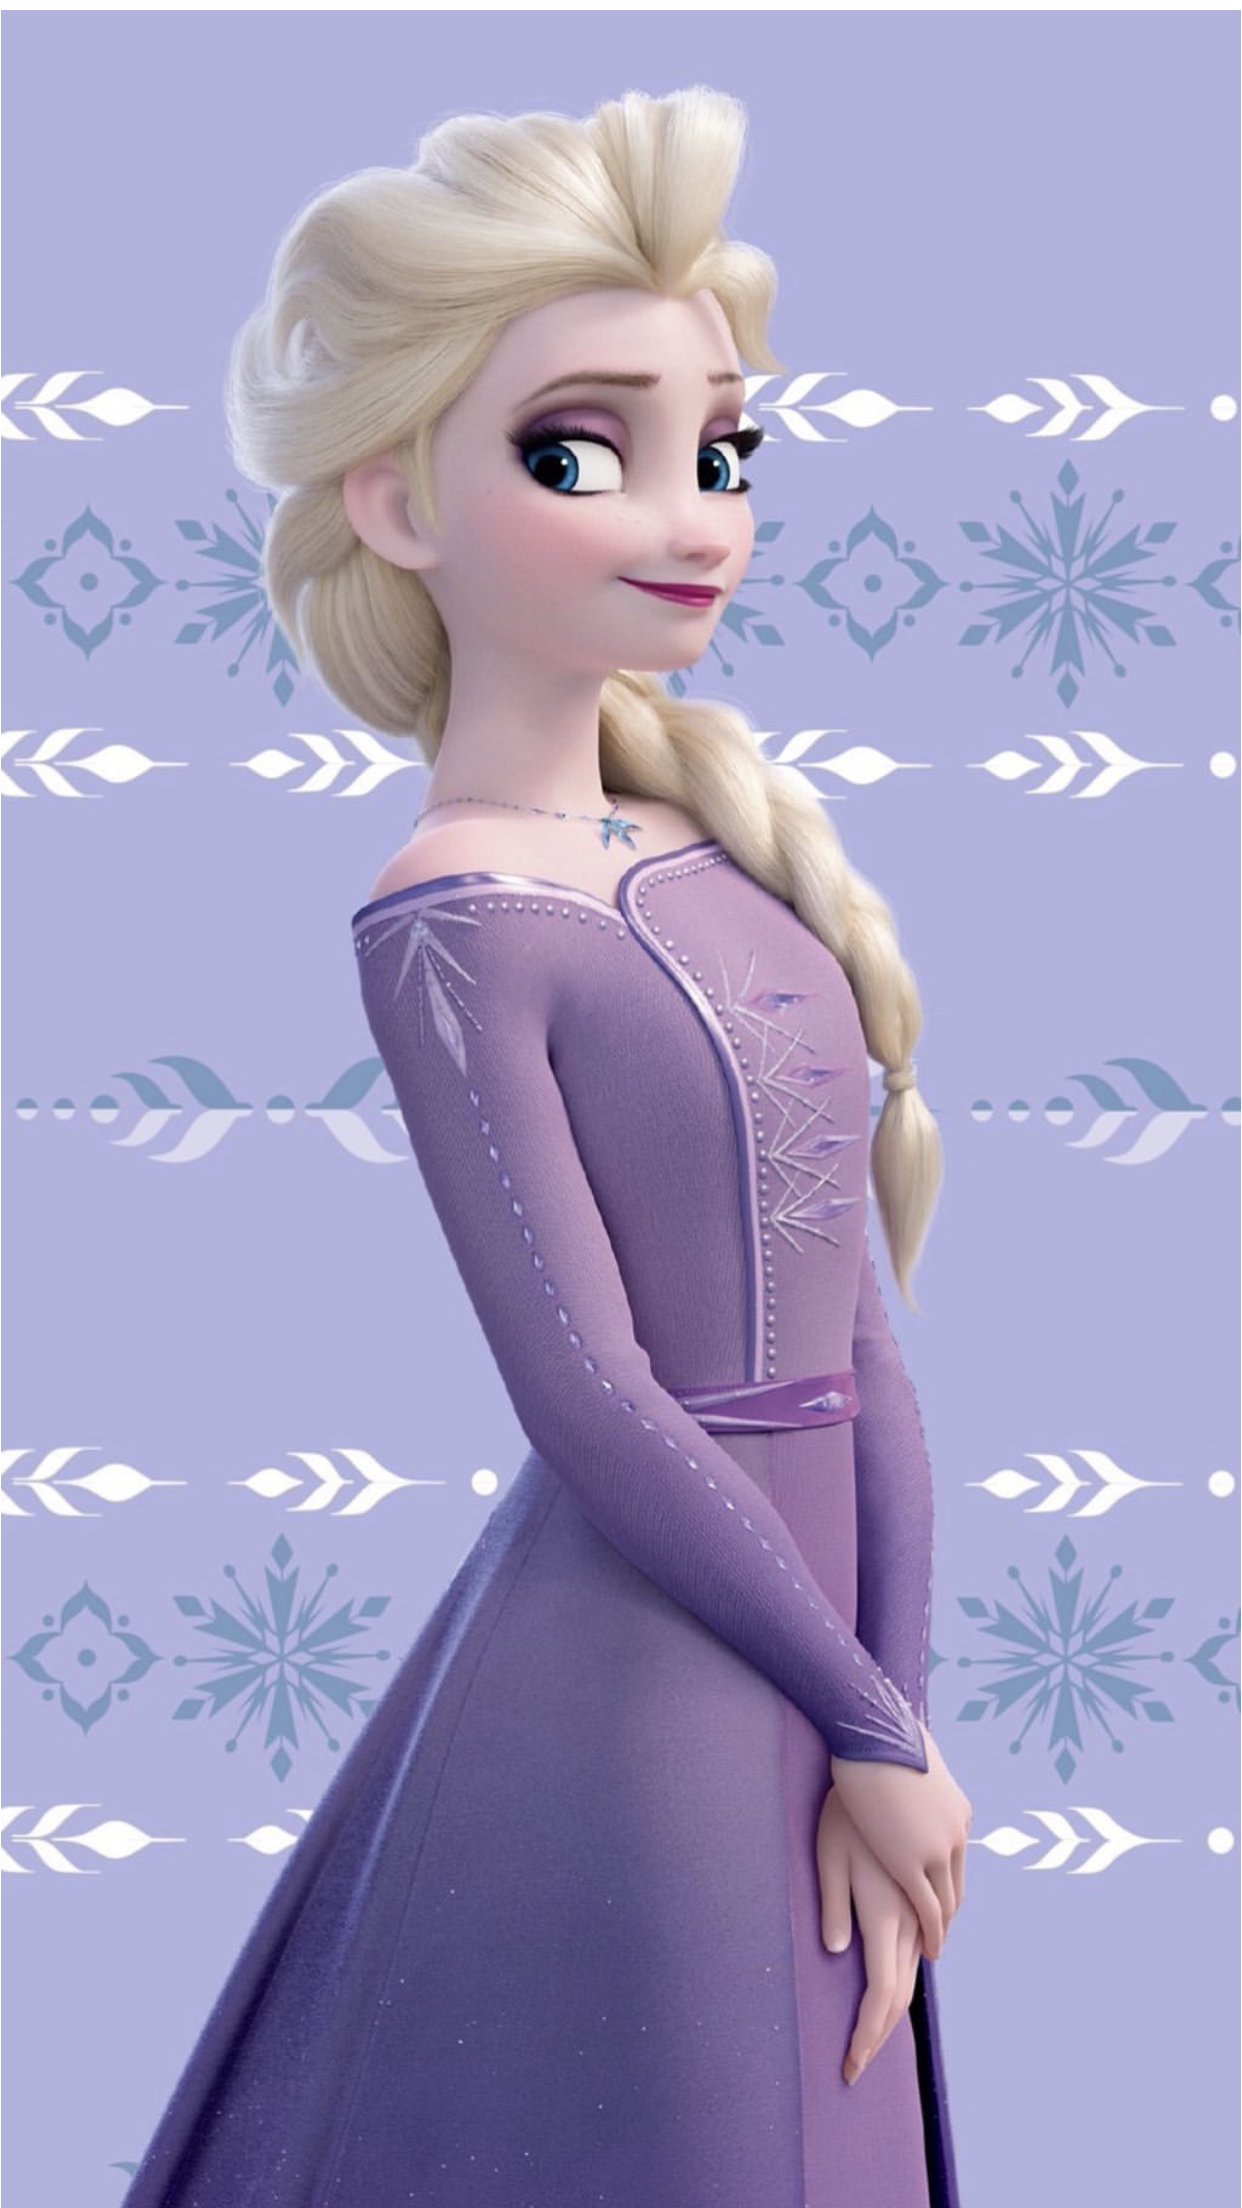 Elsa in her new and beautiful lilac purple dress from Frozen 2